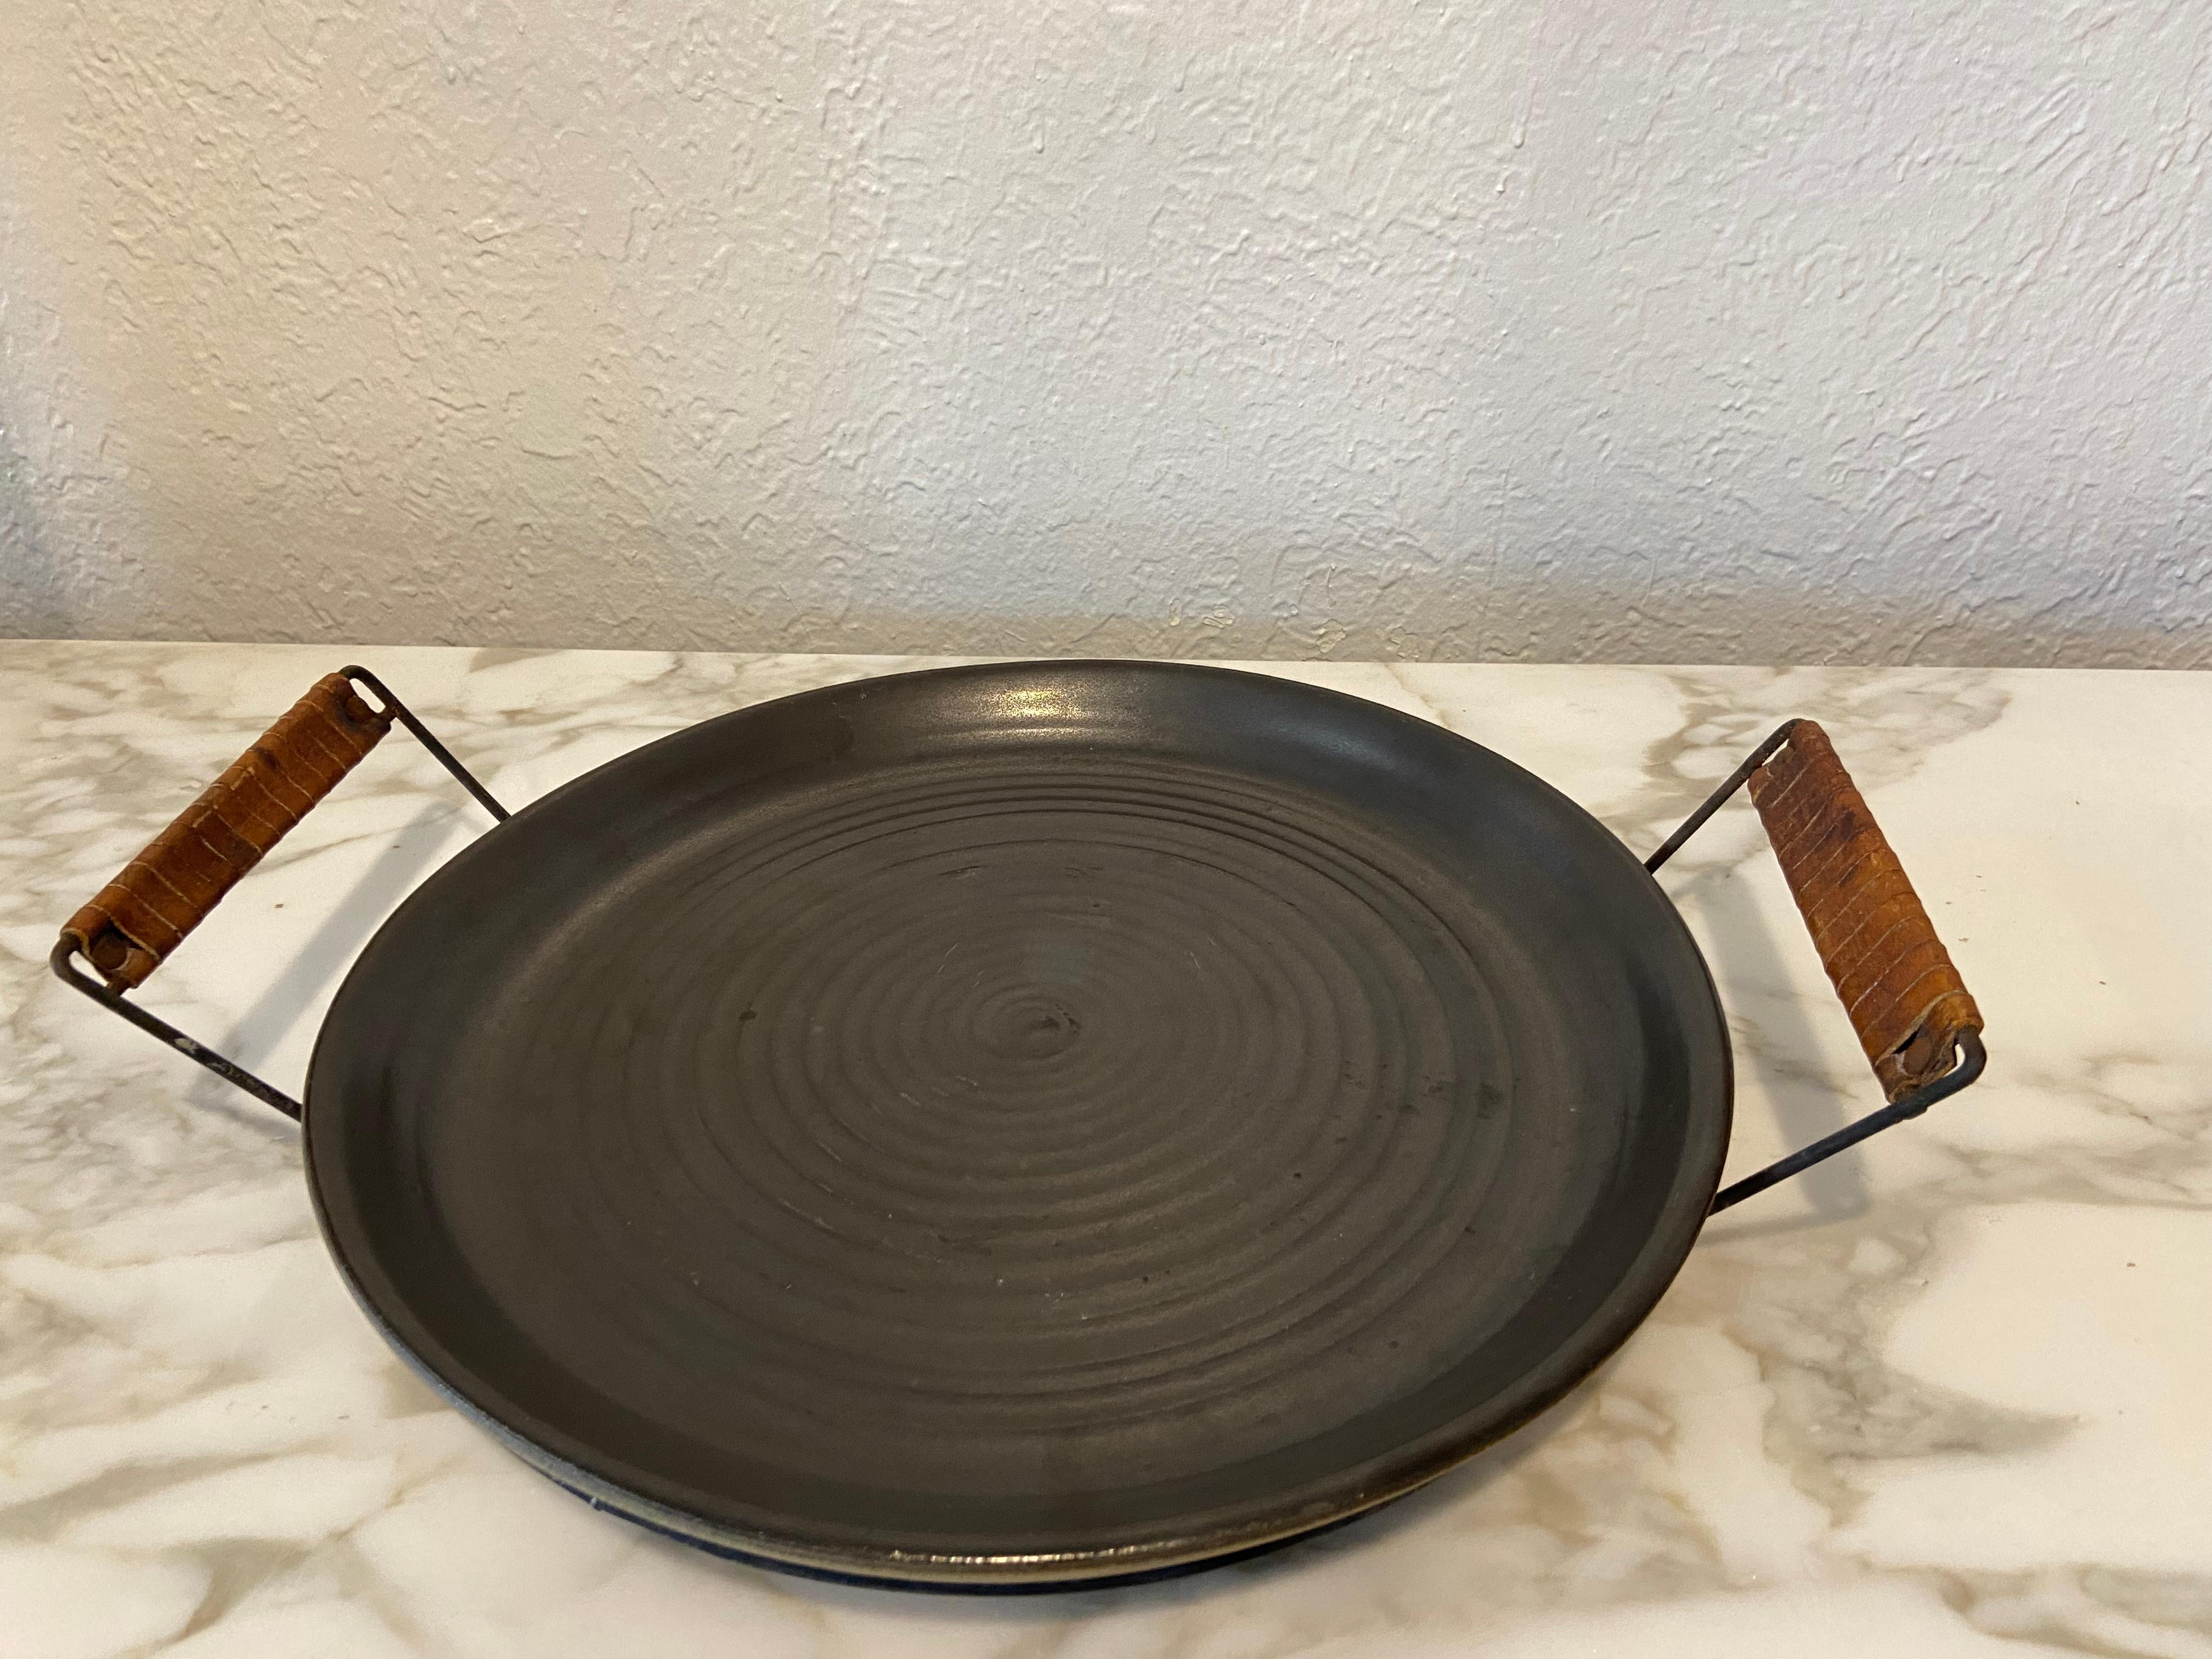 Rare Gordon Martz ceramic serving platter. Server consist of two separate components. There are no chips or cracks to the dish. The caddy shows signs of wear (please refer to photos). 

Would work well in a variety of interiors such as modern, mid